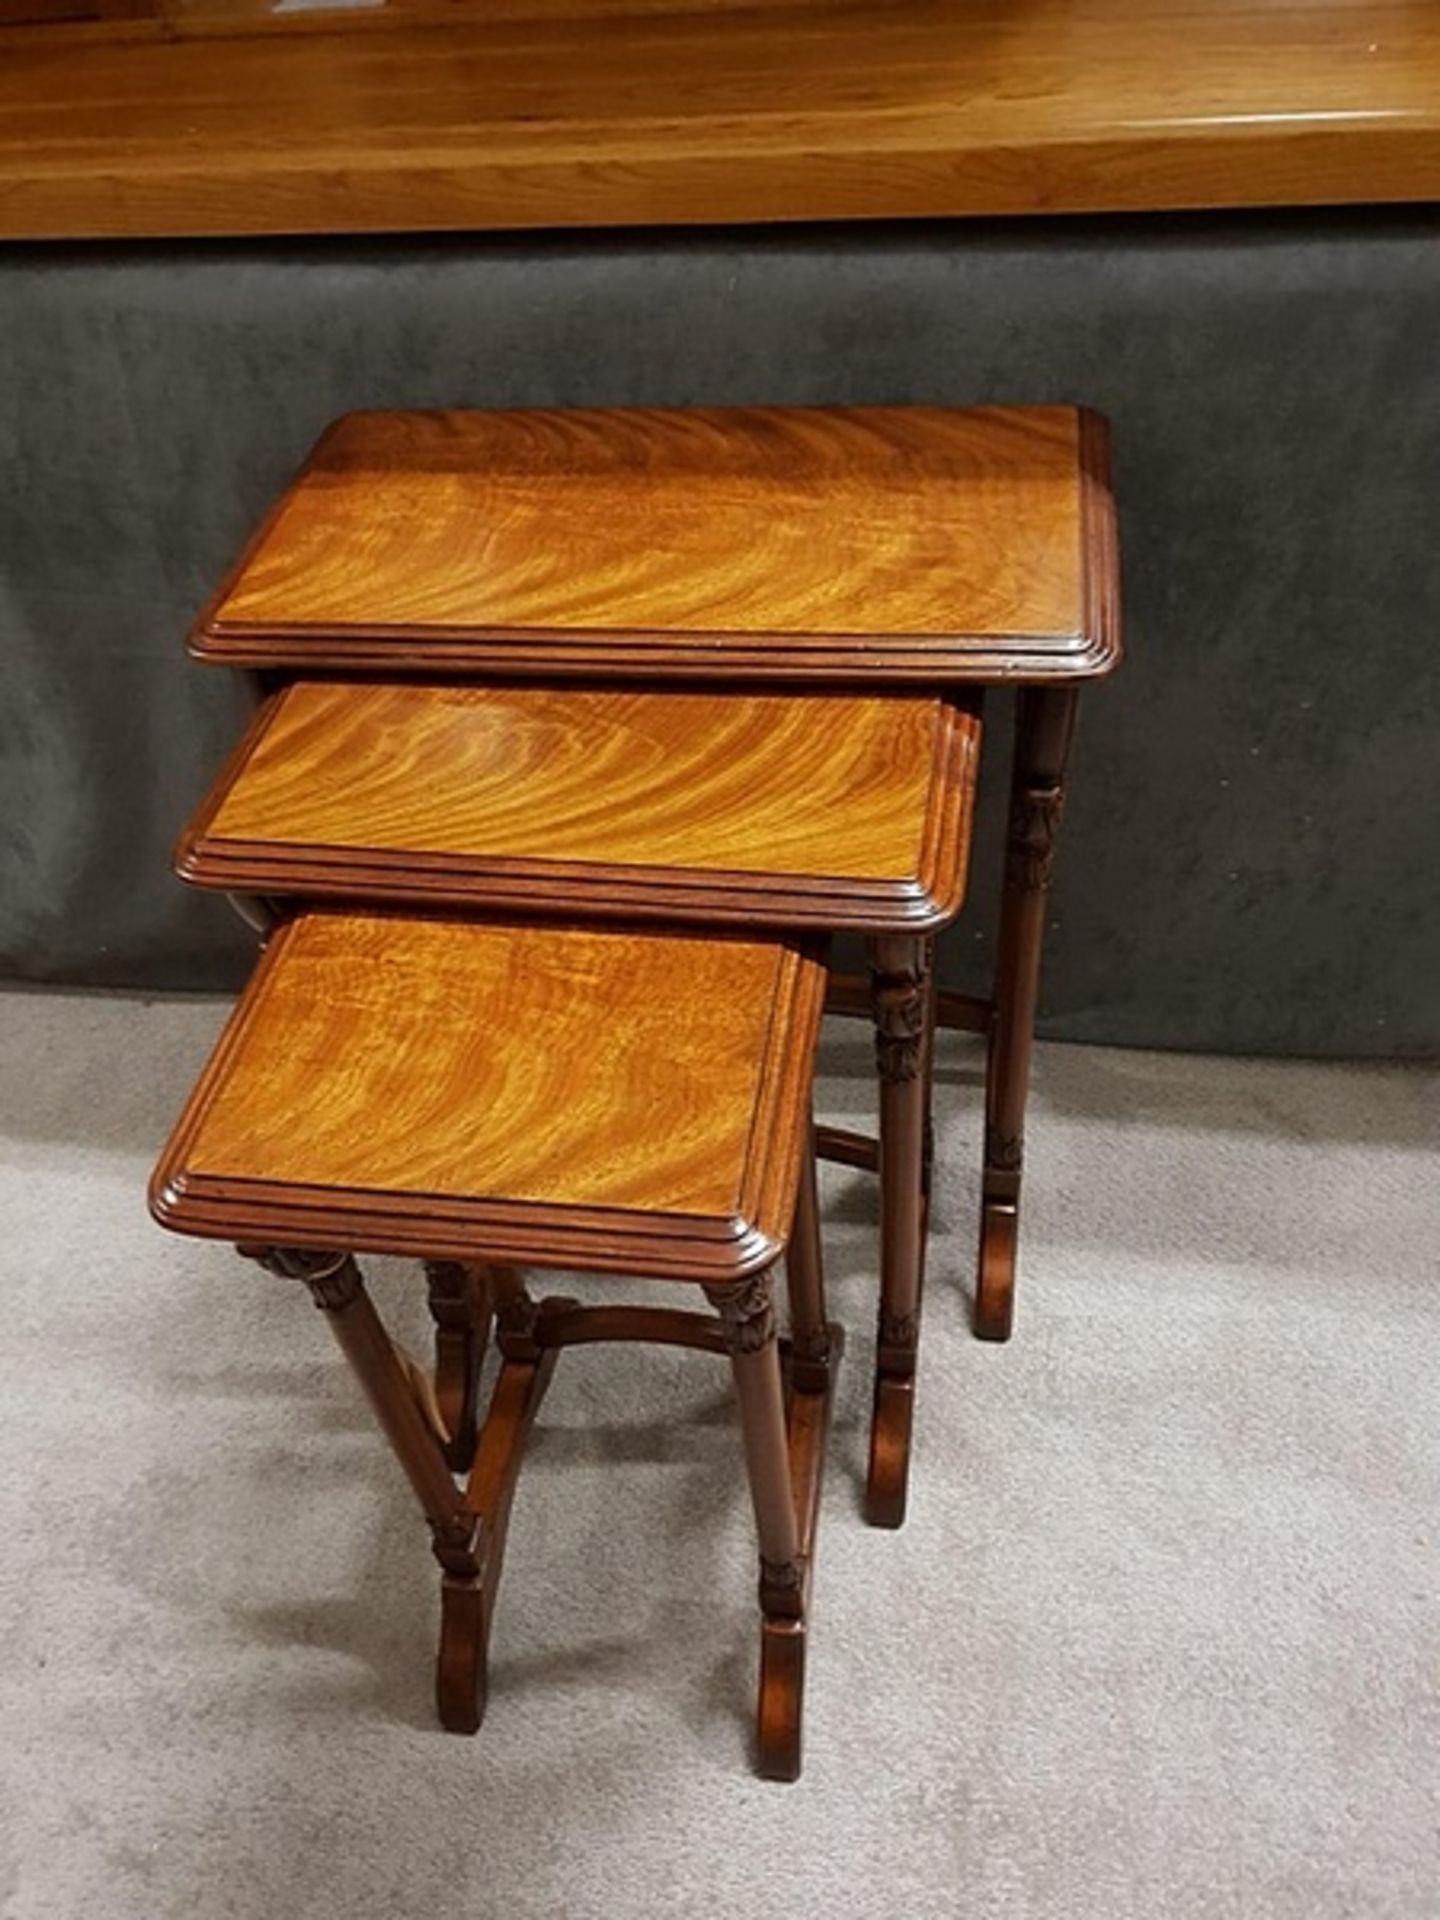 Tables - Century Furniture Manor Nesting Tables These Three Nesting Tables Feature Rectangular